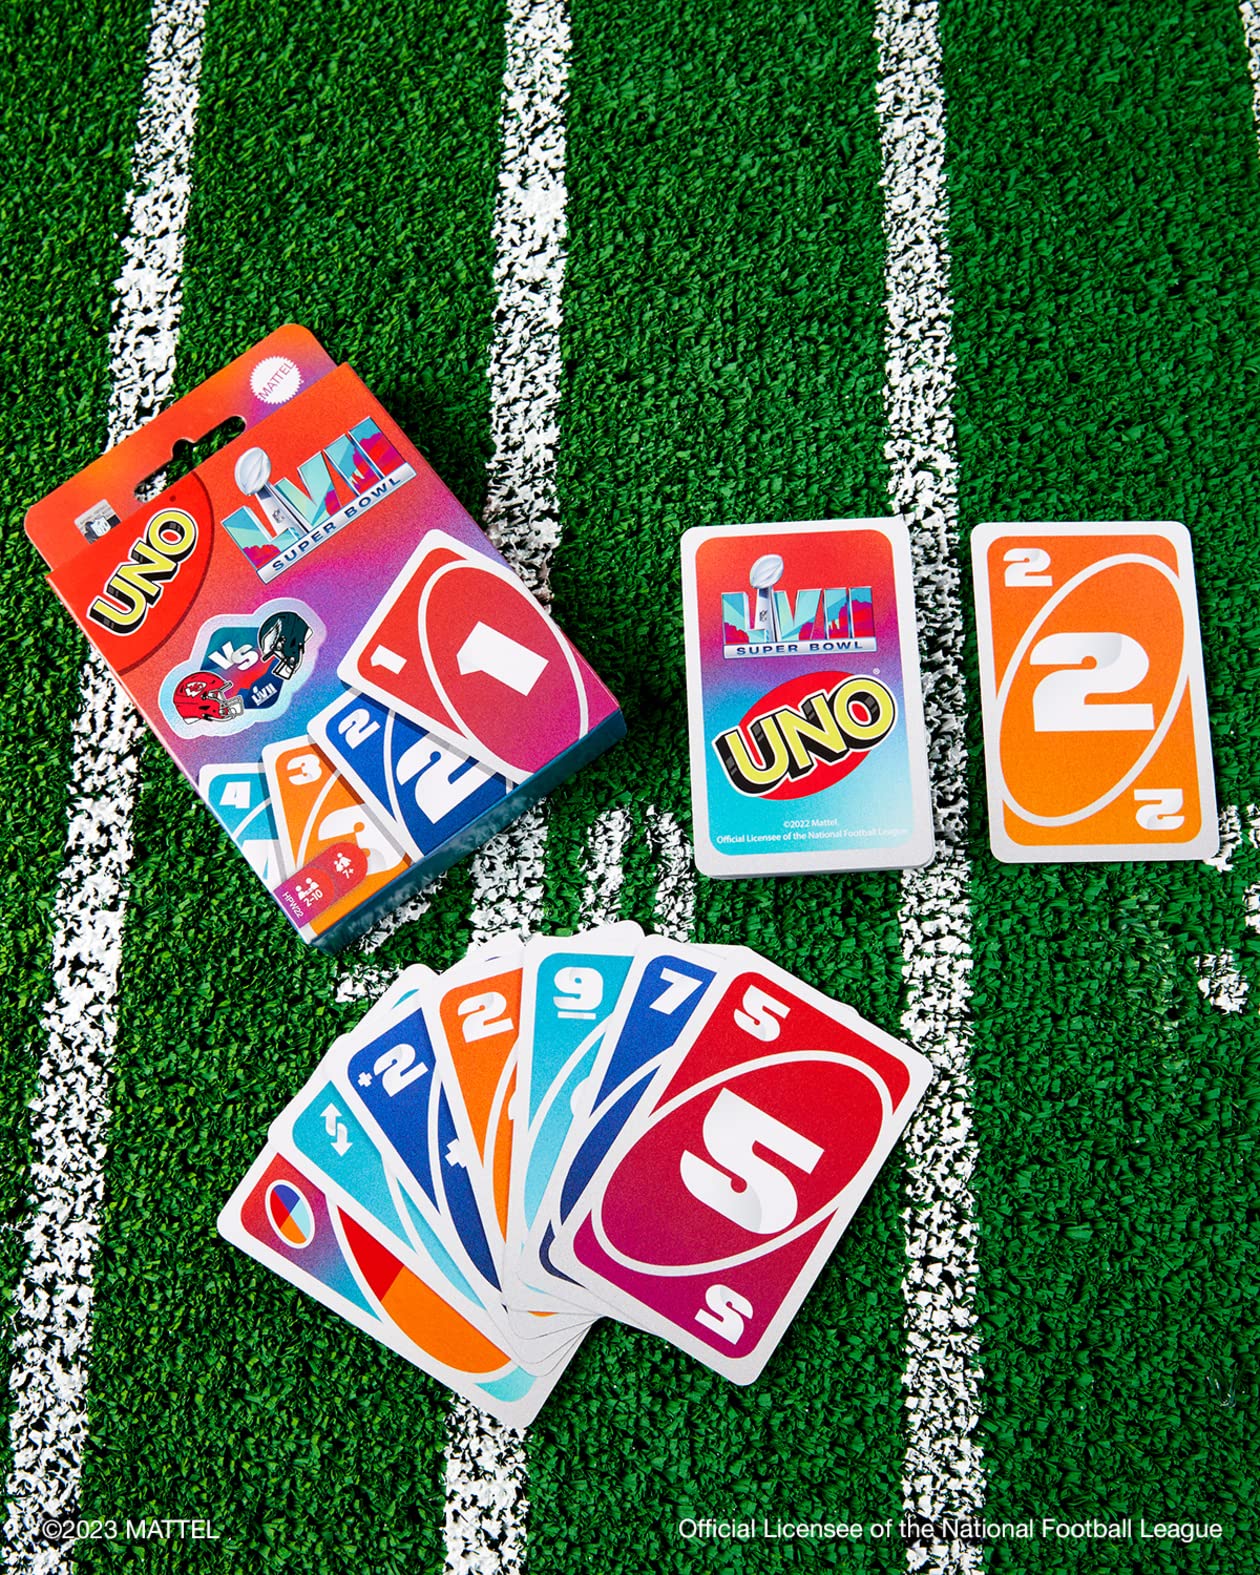 Mattel Games UNO NFL LVII Card Game for Kids, Adults, Family and Game Night with Special 